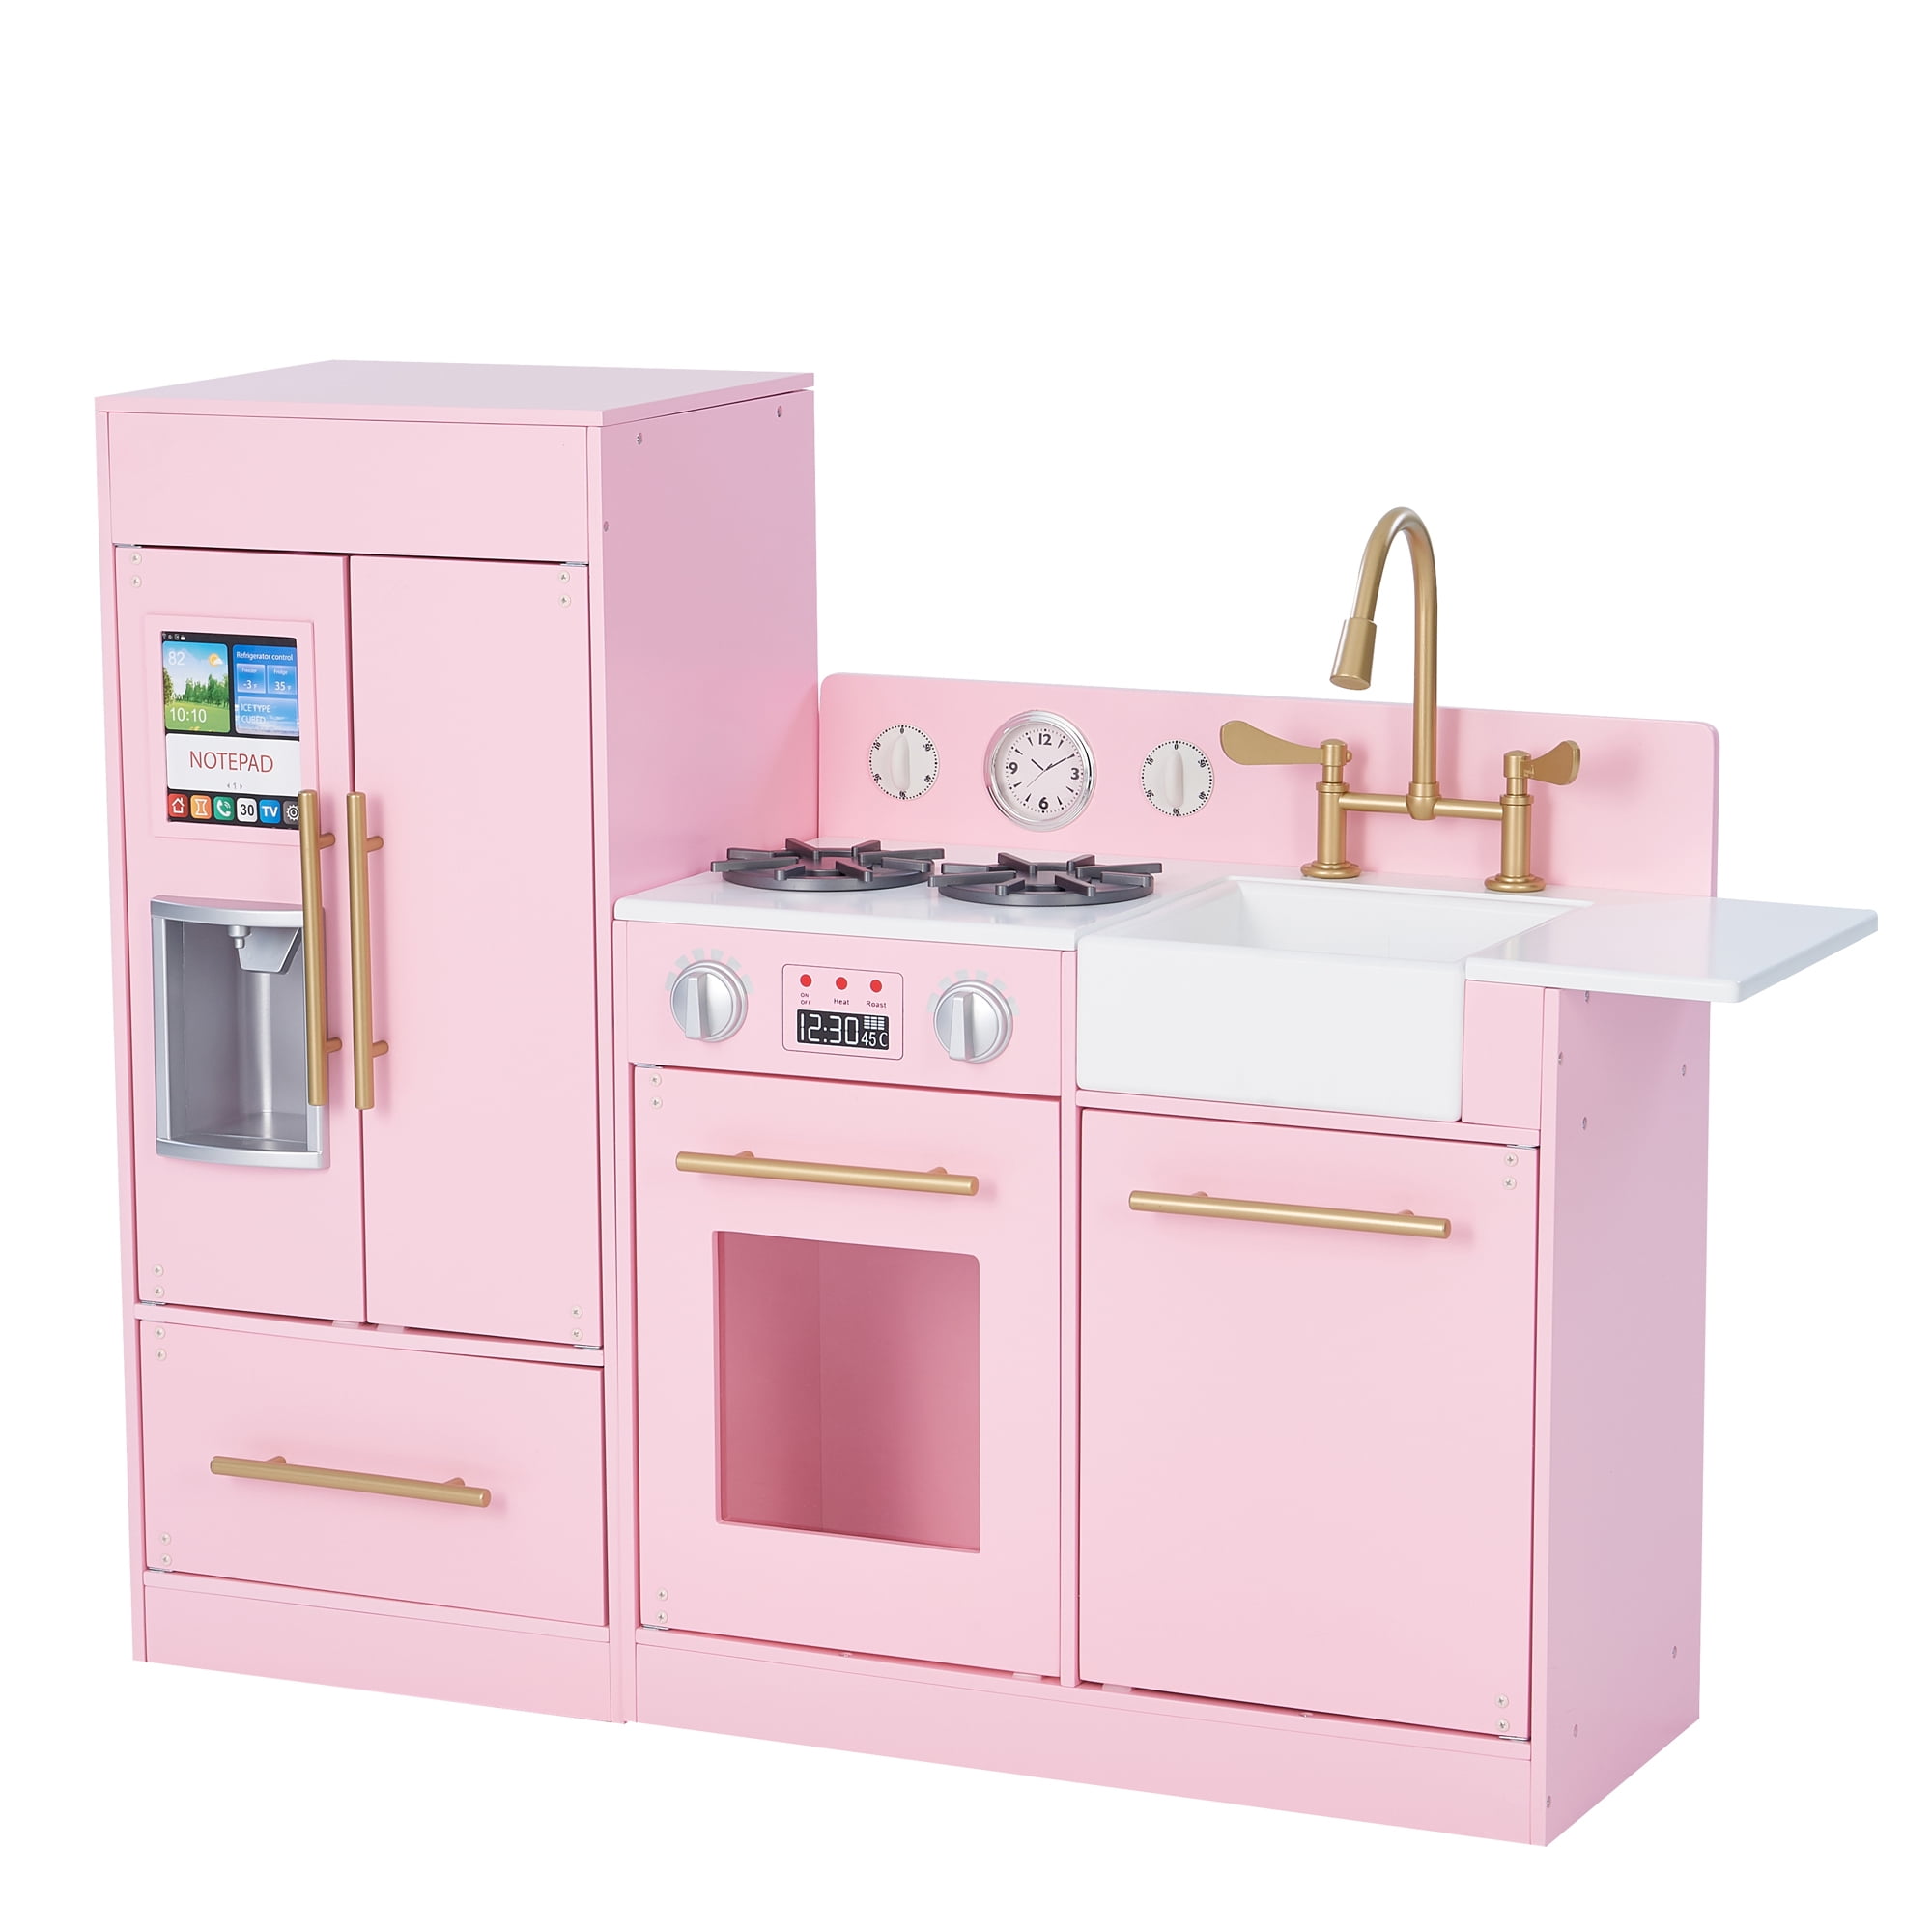 Teamson Kids Retro Wooden Play Kitchen With Refrigerator Freezer Oven and 2 for sale online 